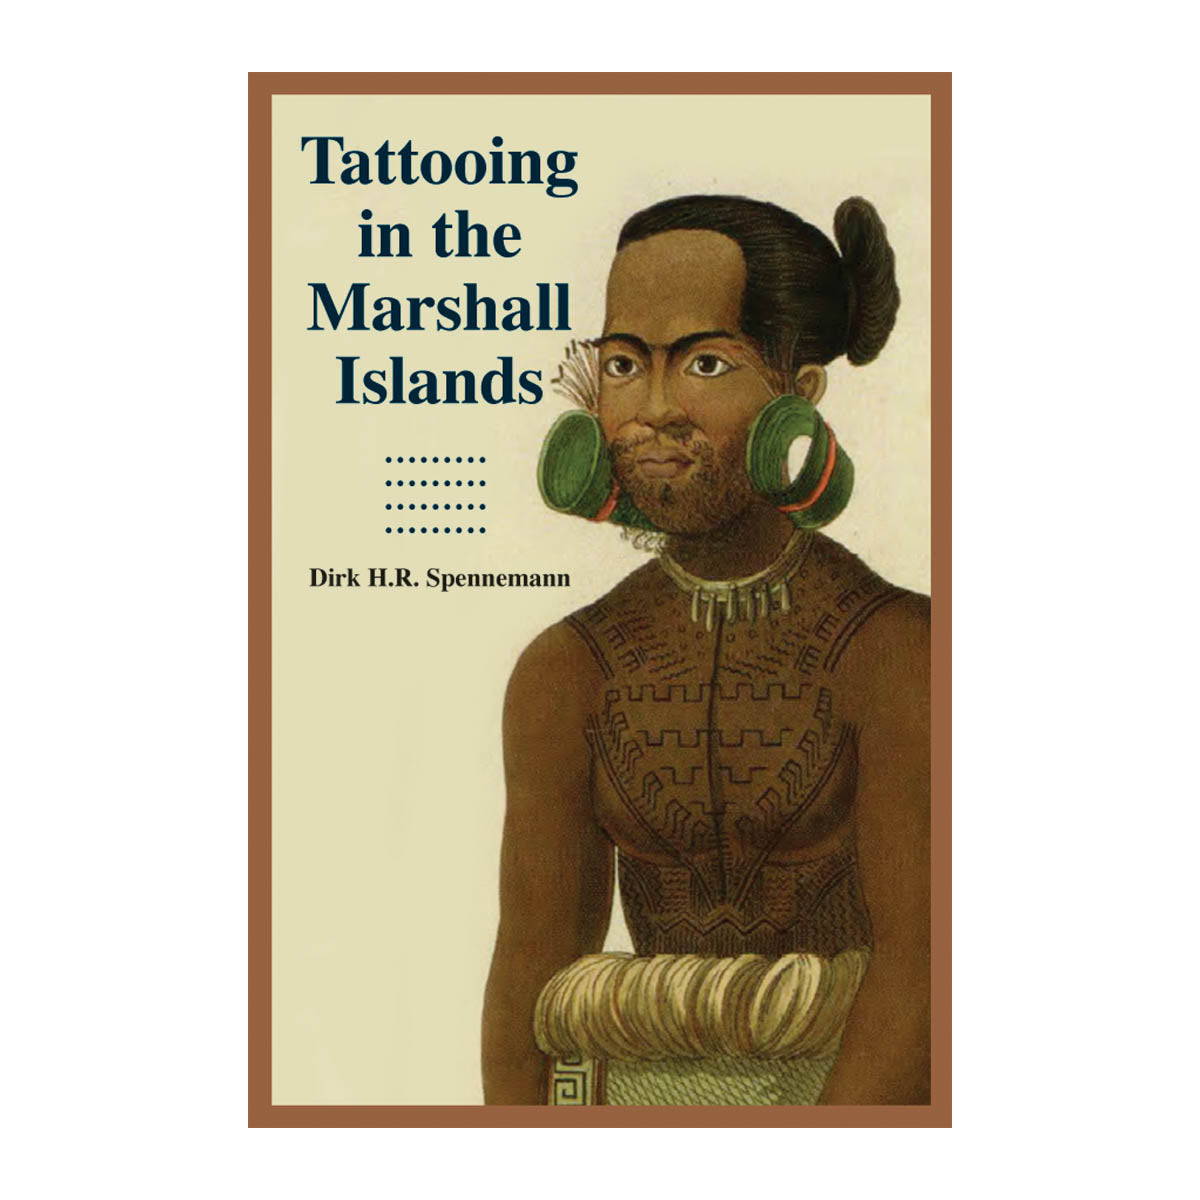 Tattooing in the Marshall Islands